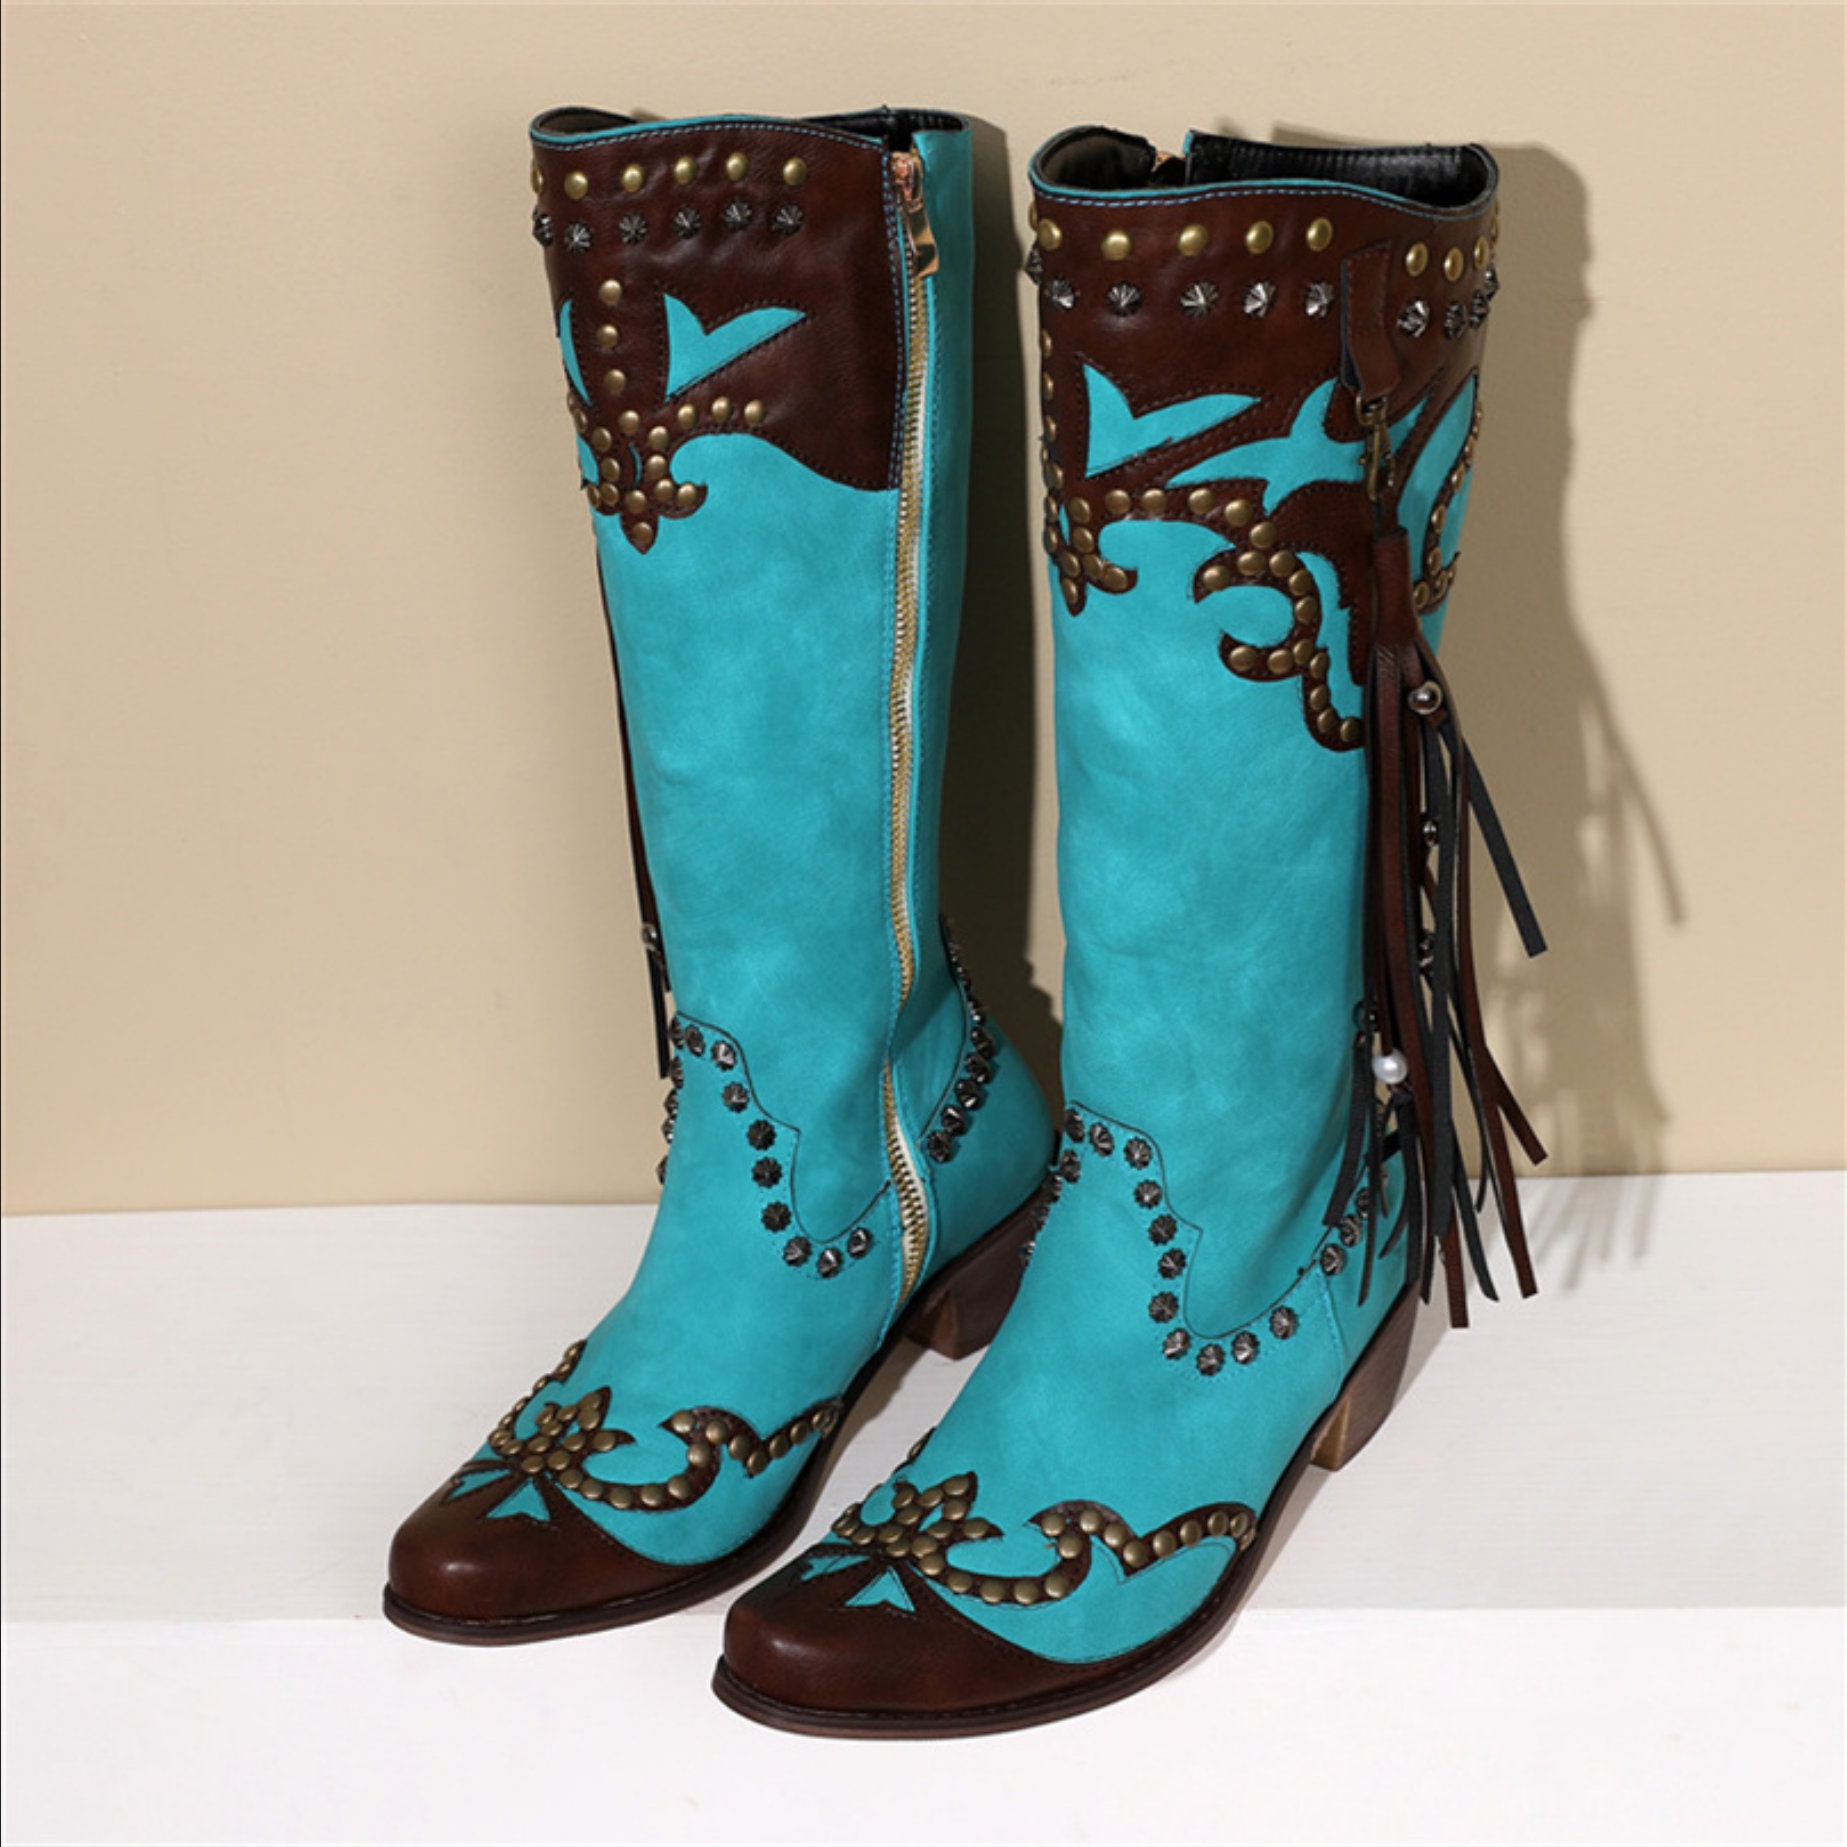 Blue & Brwon Square Heel Cowgirl Boots, Punched PU Leather Boots ...